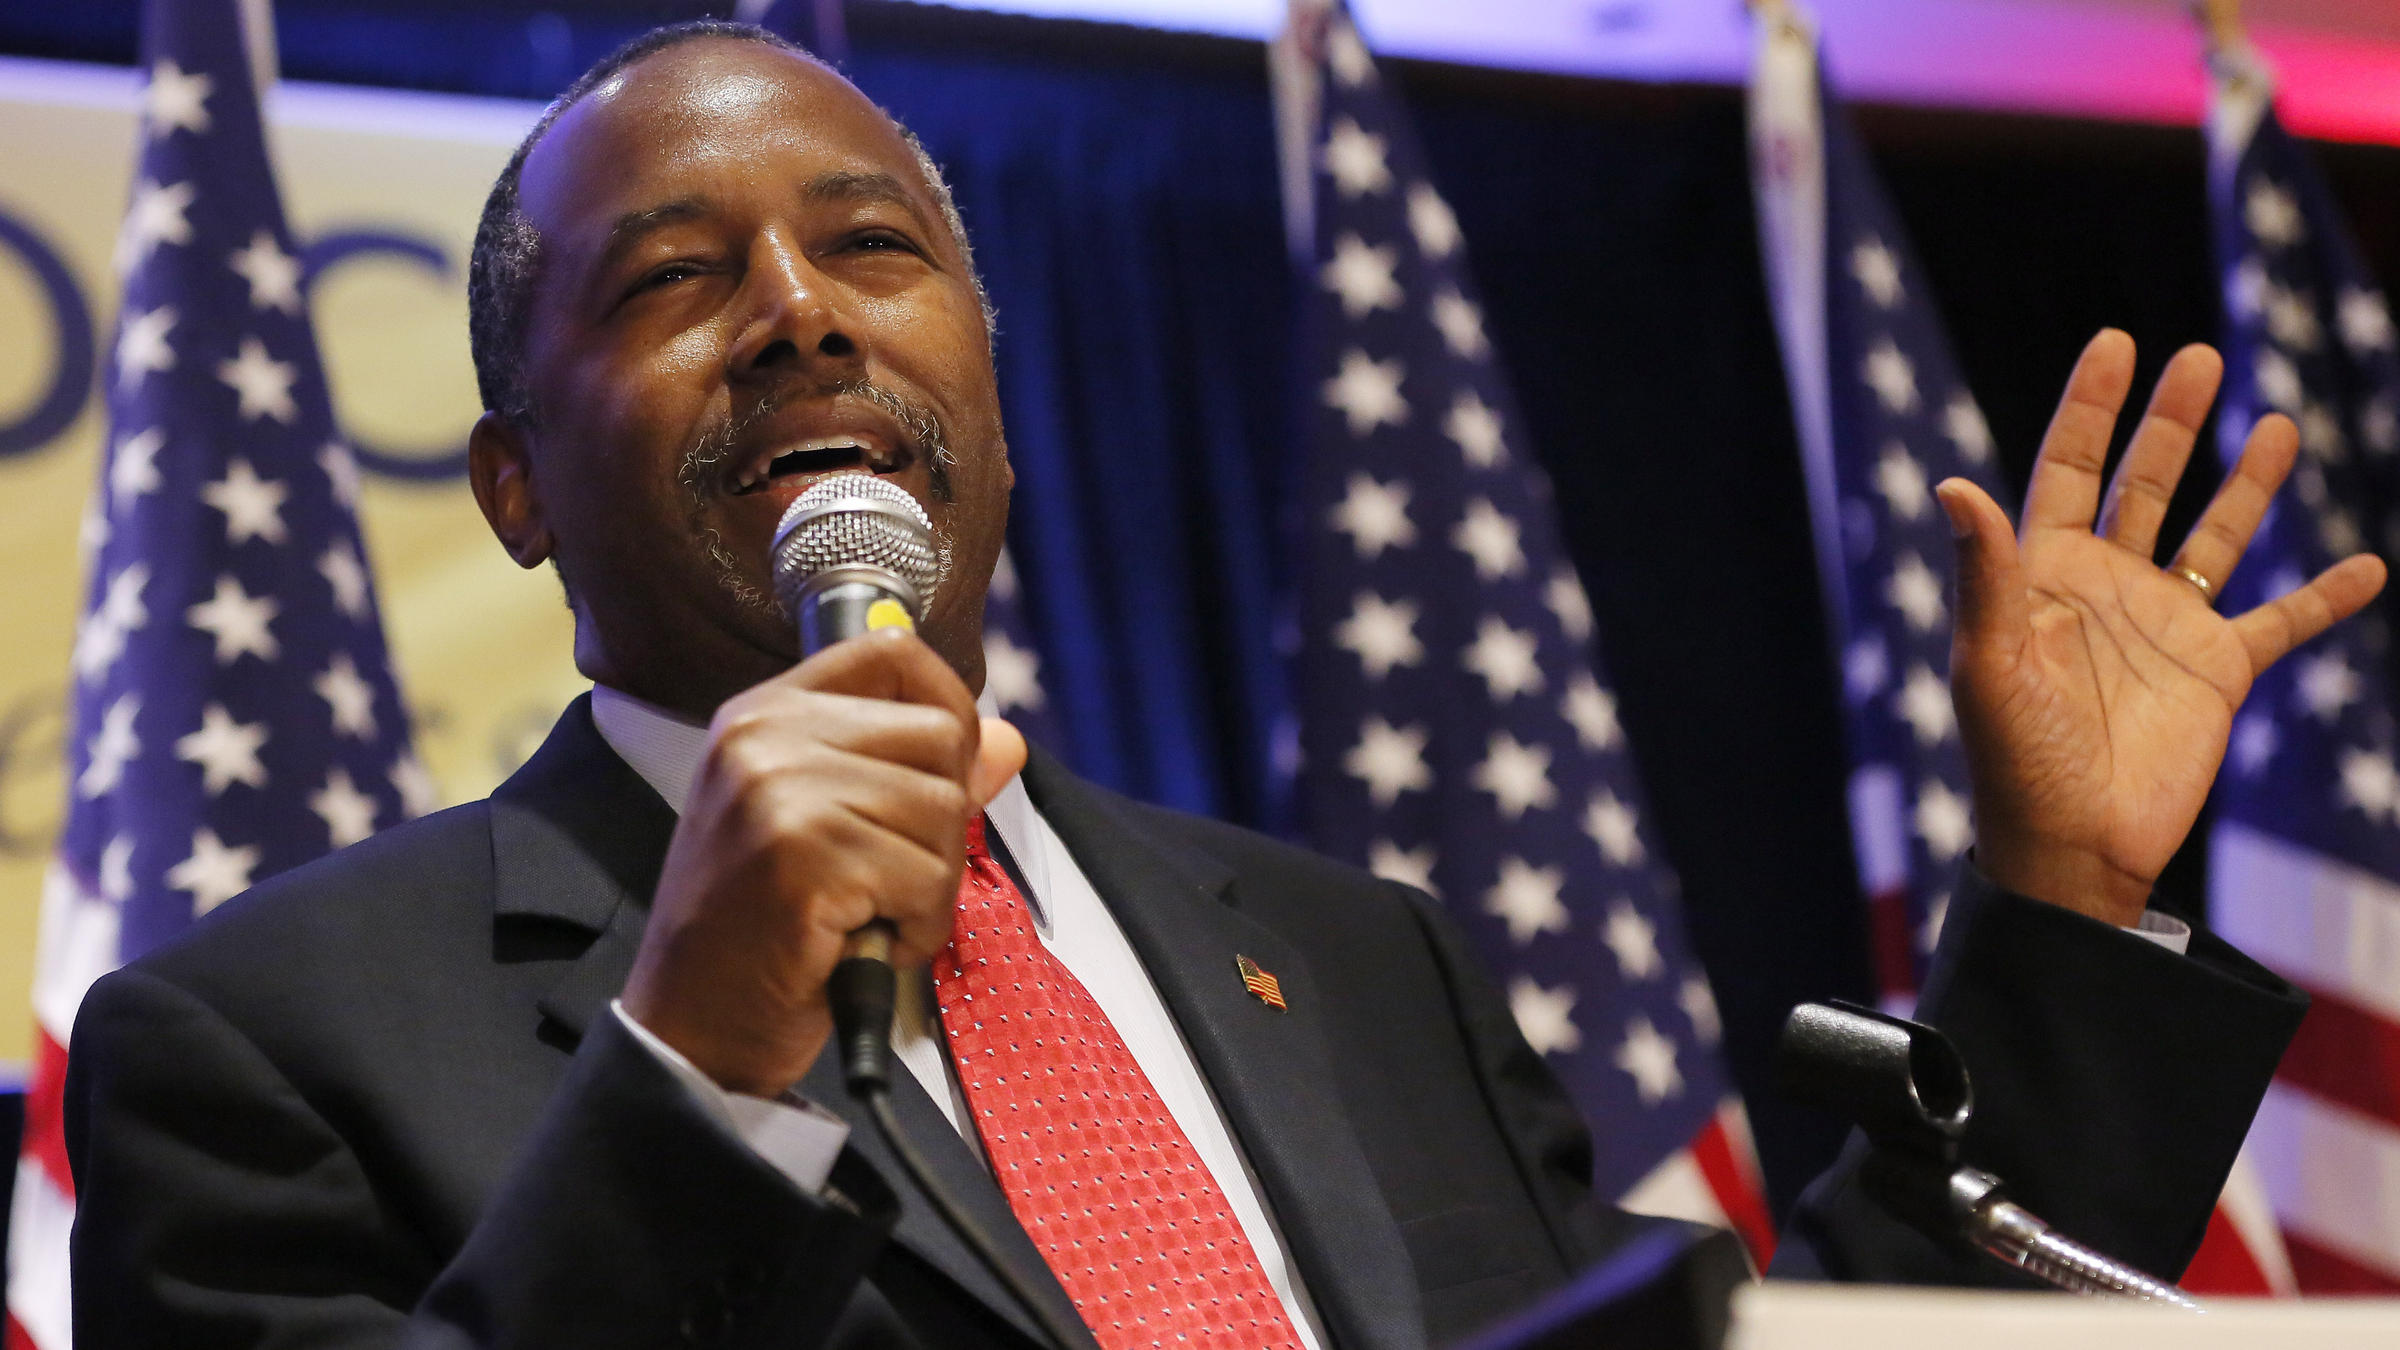 gifted hands ben carson presidential candidate